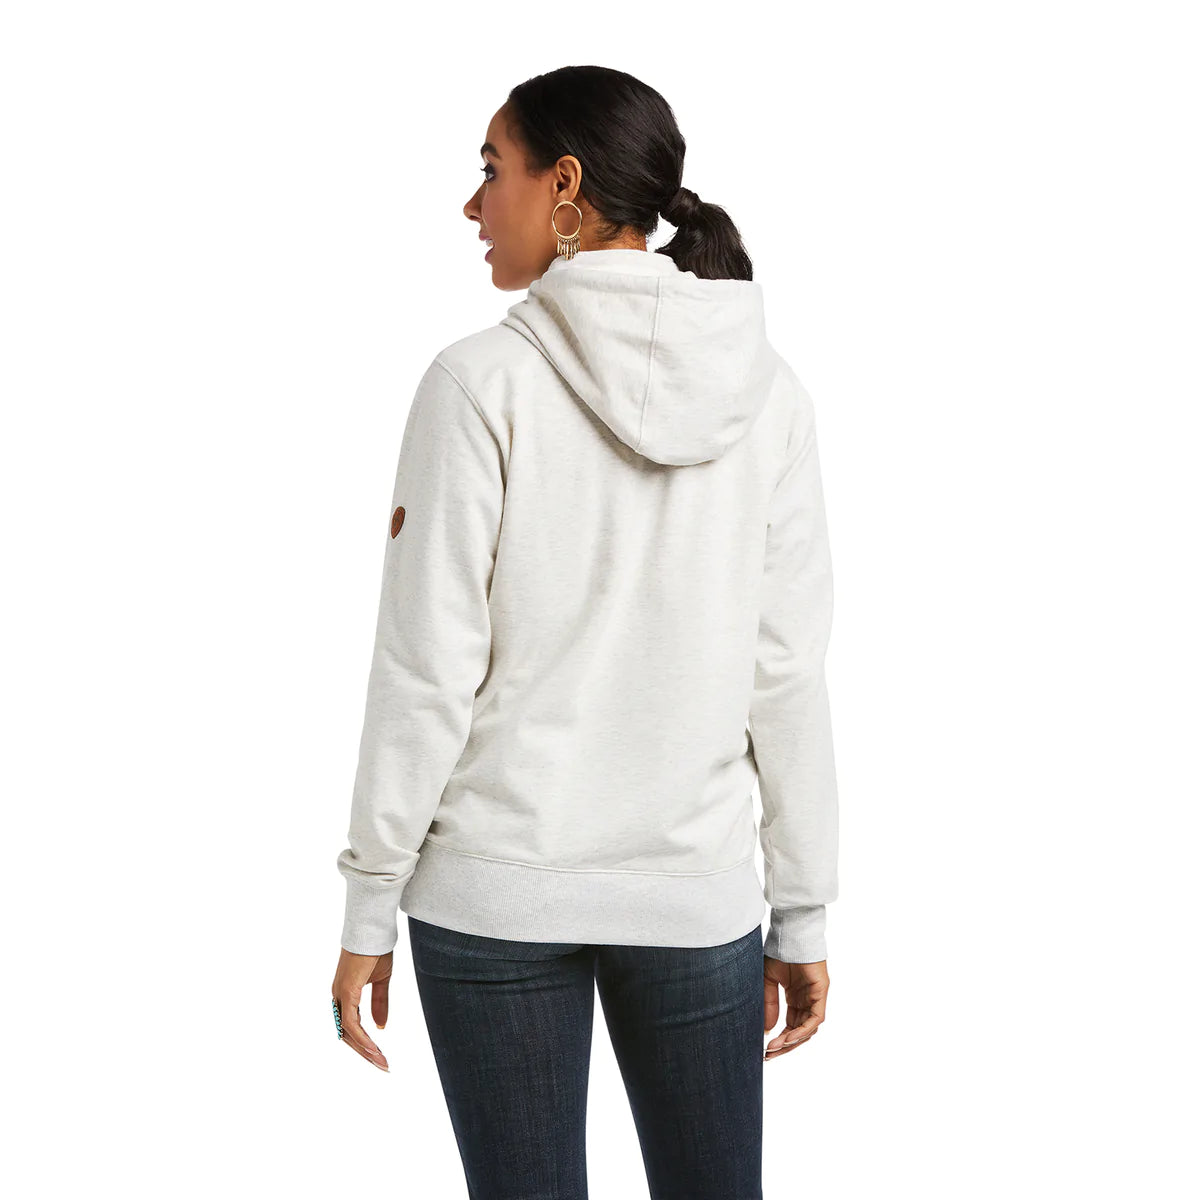 Womens Ariat REAL Elevated Hoodie - White Sand Heather (6759805190221)